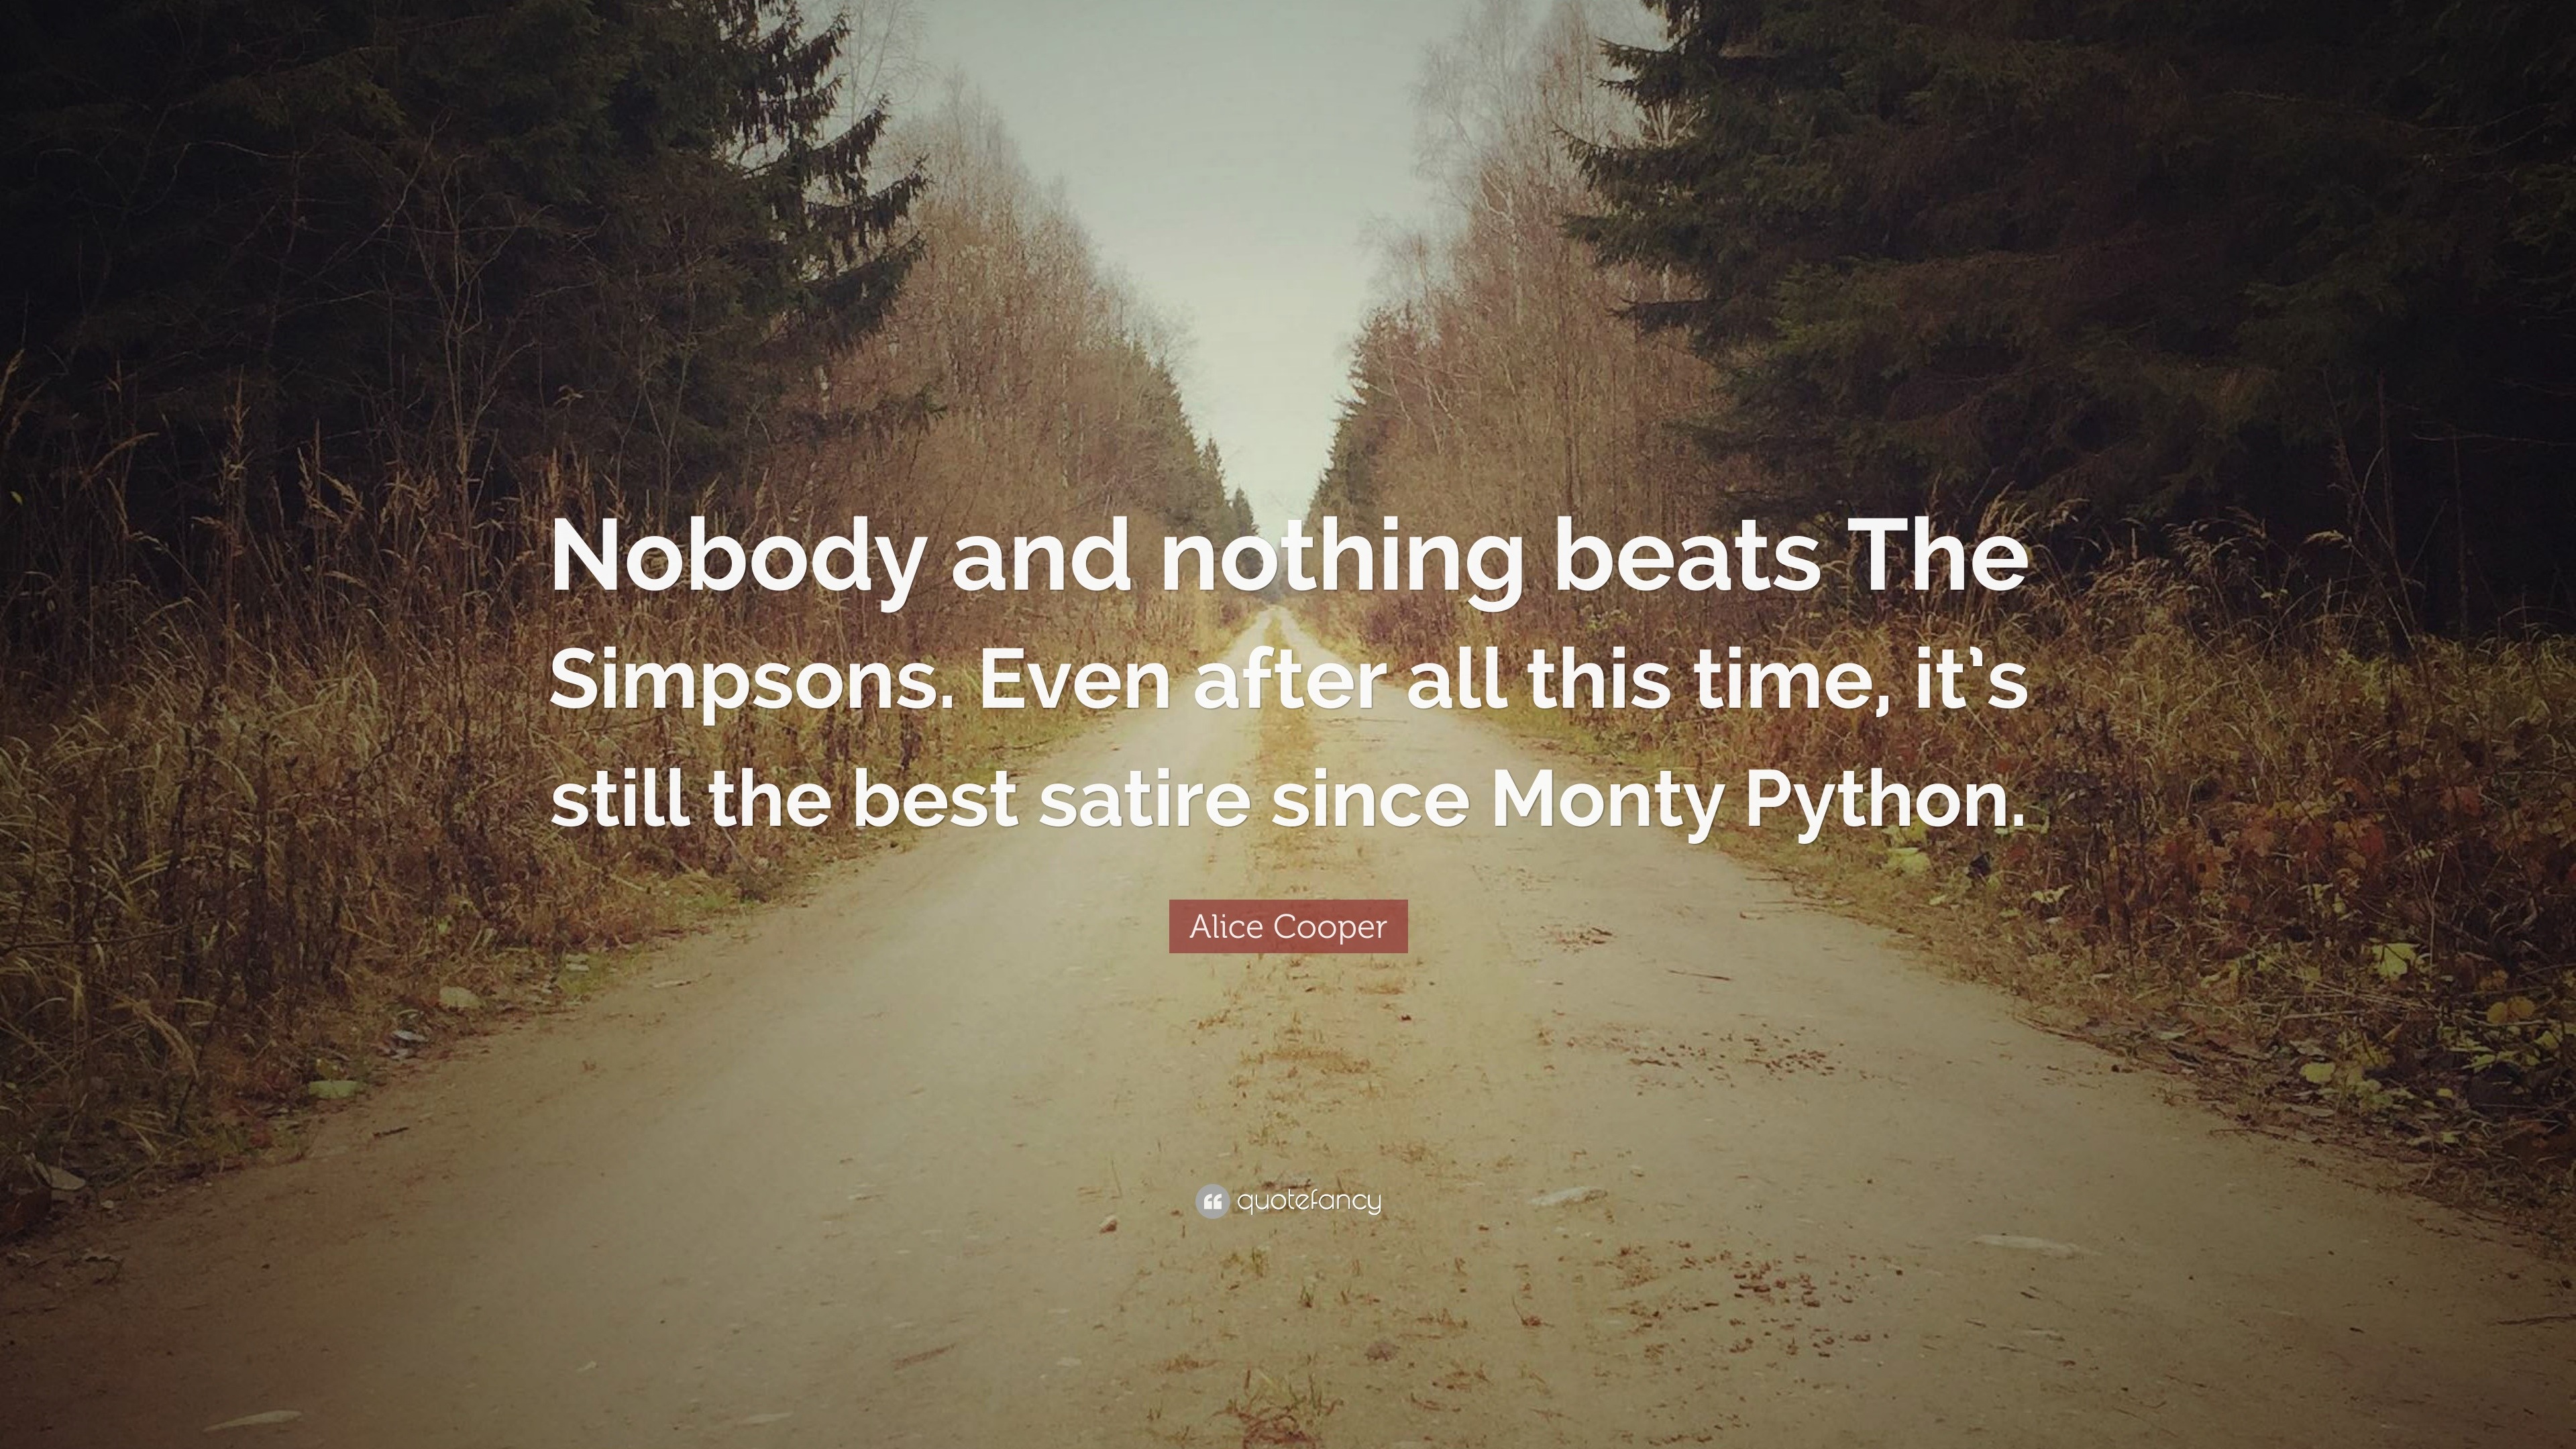 alice cooper quote “nobody and nothing beats the simpsons even